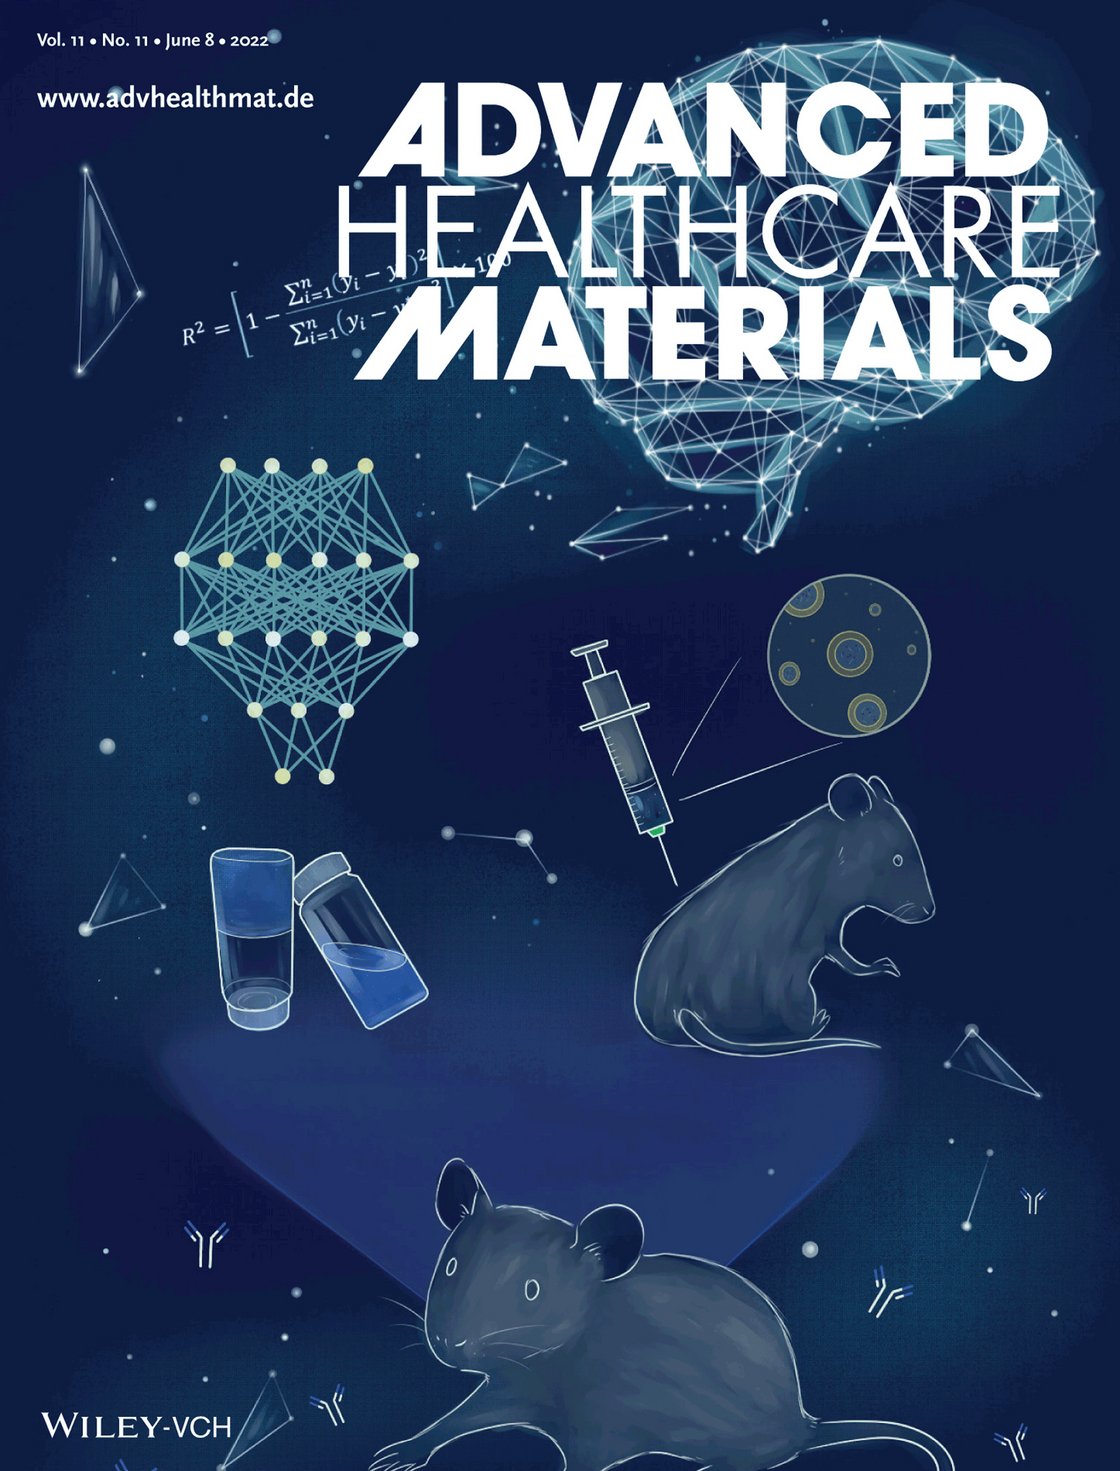 Cover page of the advanced healthcare materials journal, June 2022